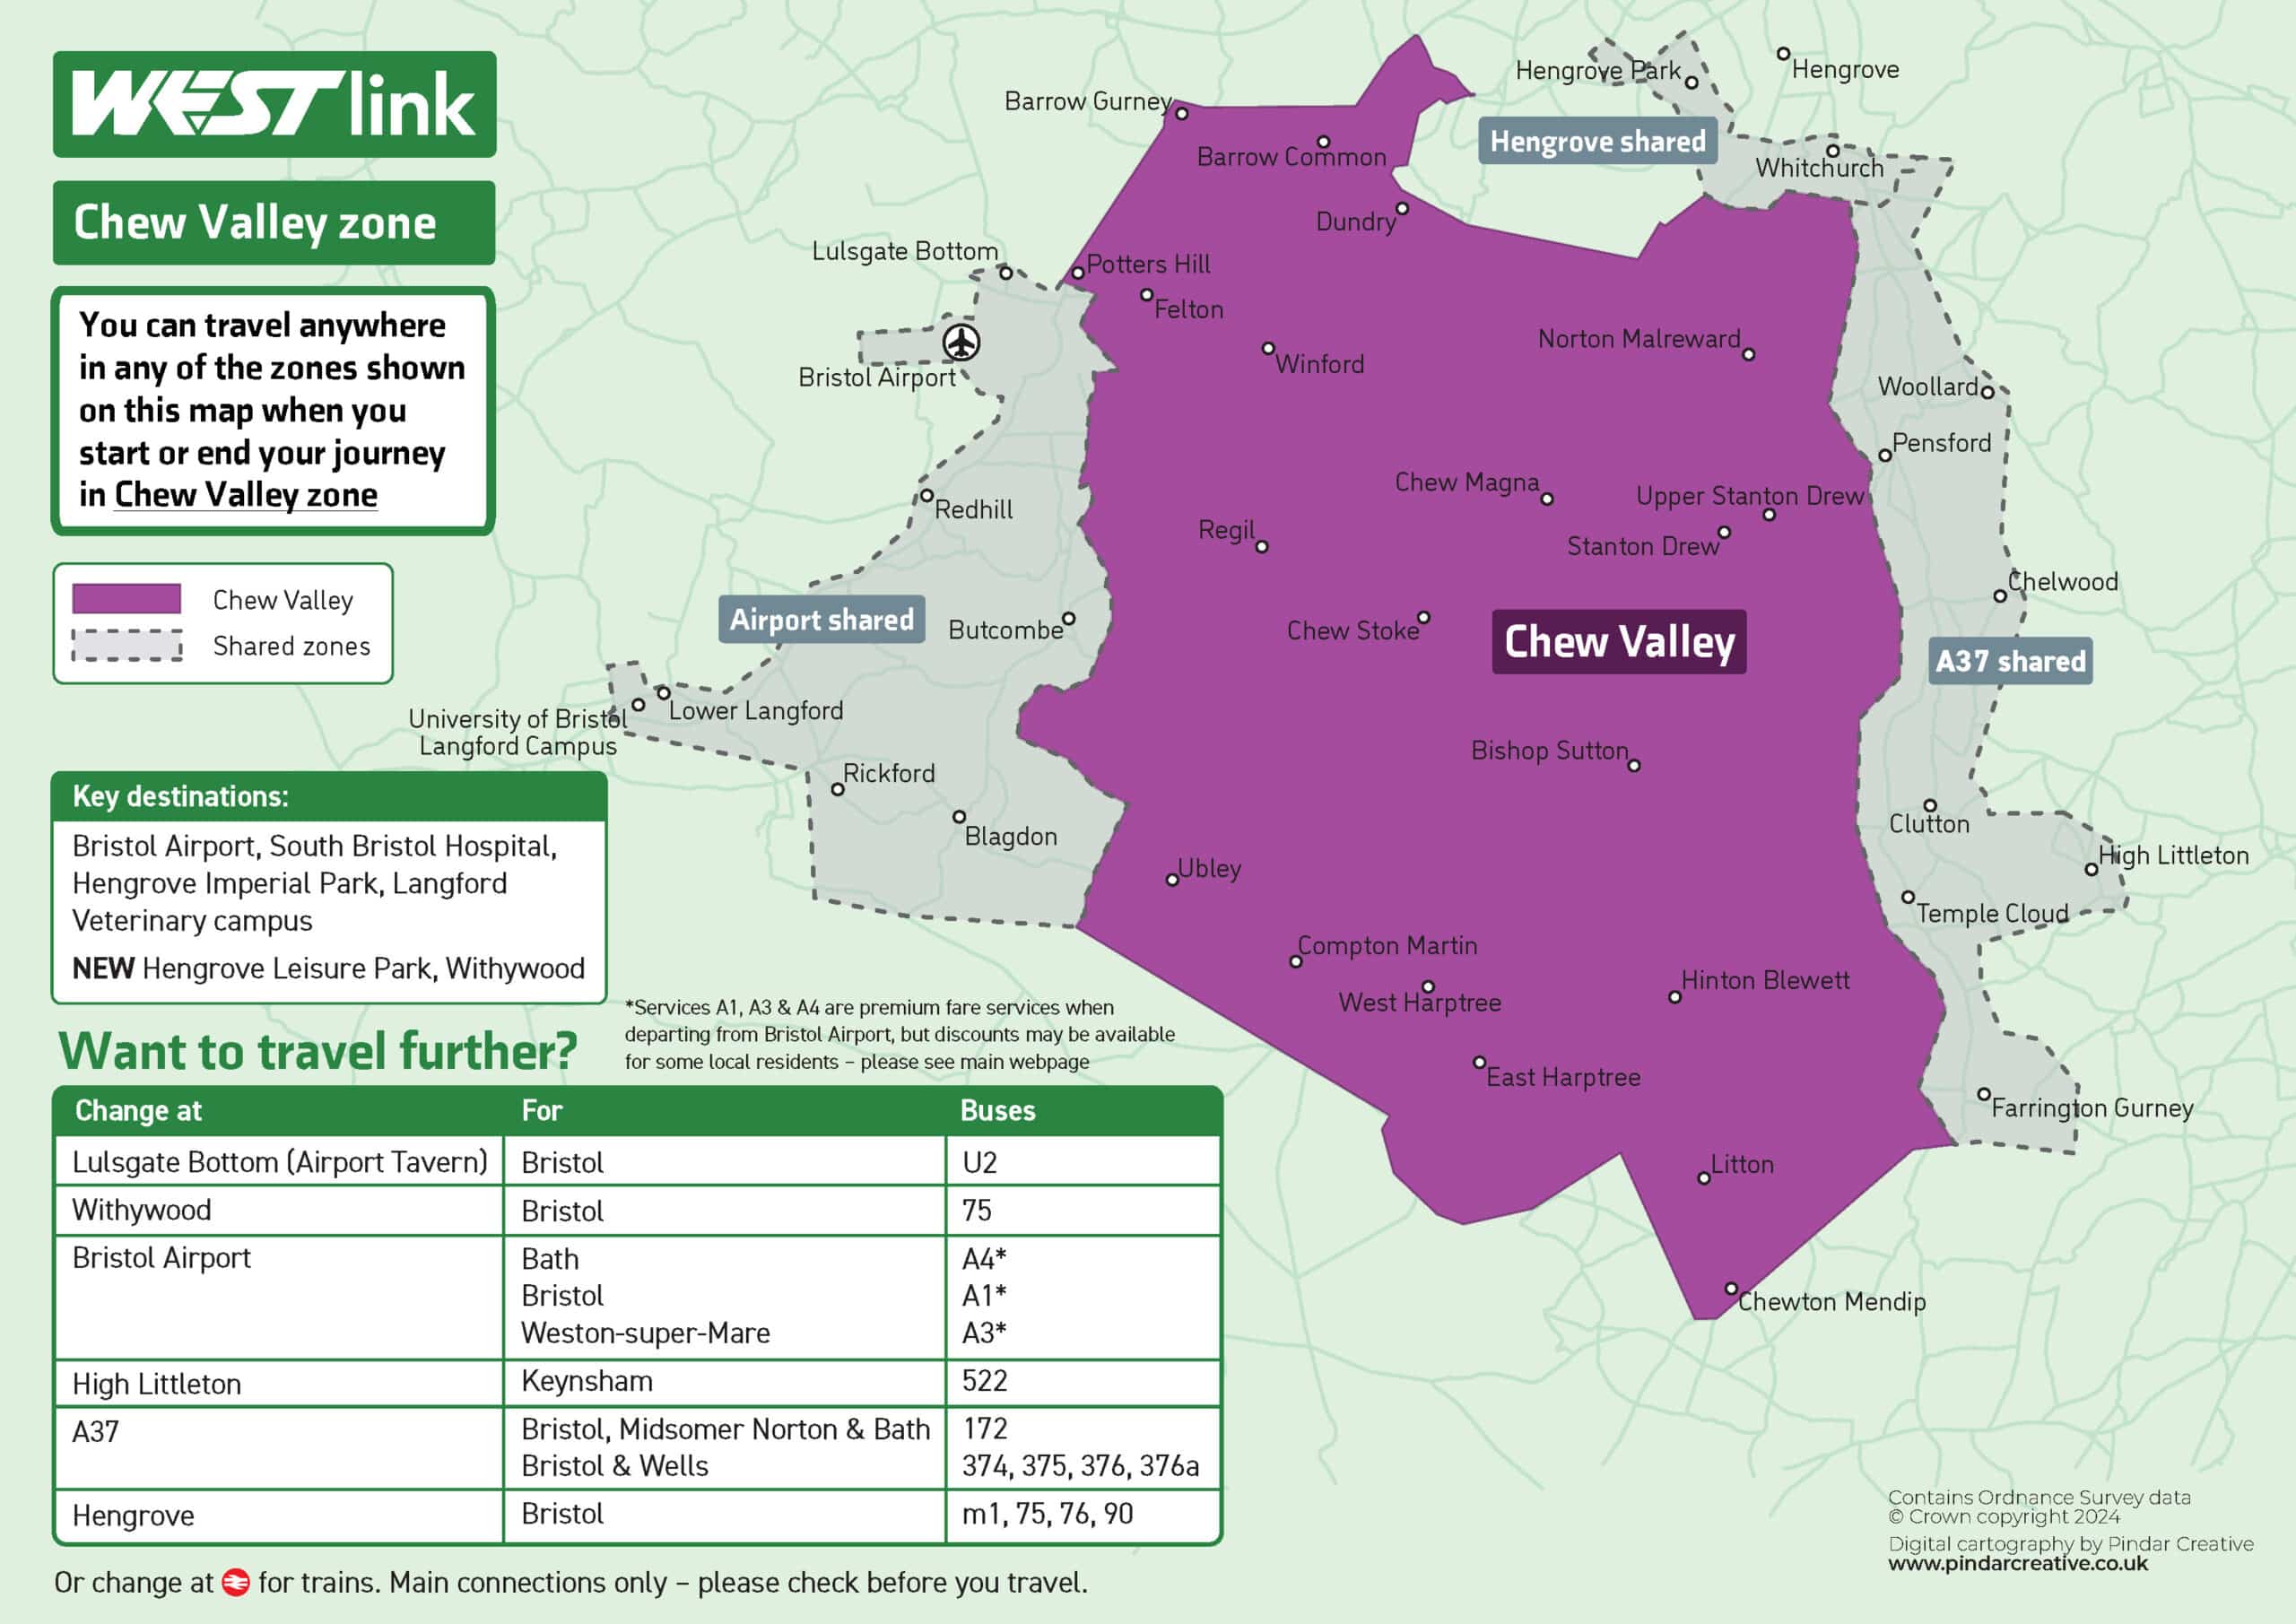 Chew Valley zone map showing the boundaries and where you can travel. This information is also provided in an accessible version below.